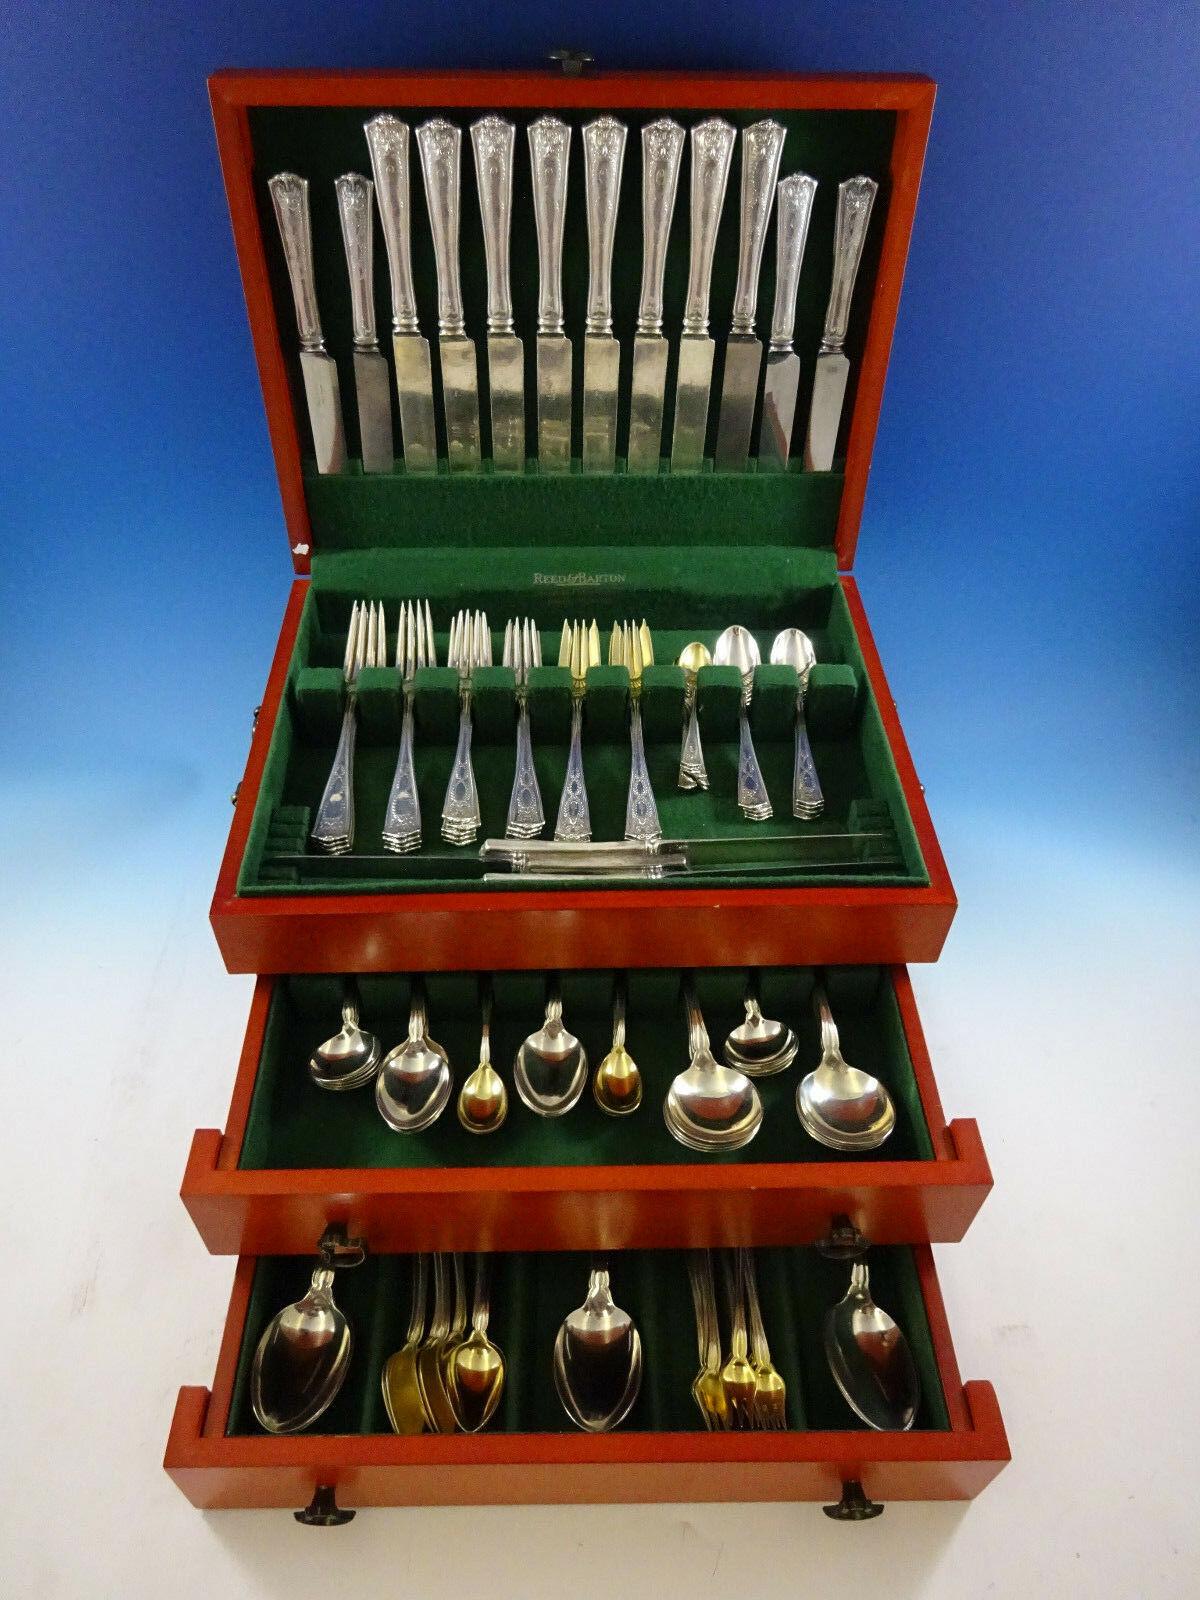 Superb Winthrop by Tiffany & Co. sterling silver dinner and luncheon size flatware set - 112 pieces. This set includes:

8 dinner size knives, blunt, 10 1/4